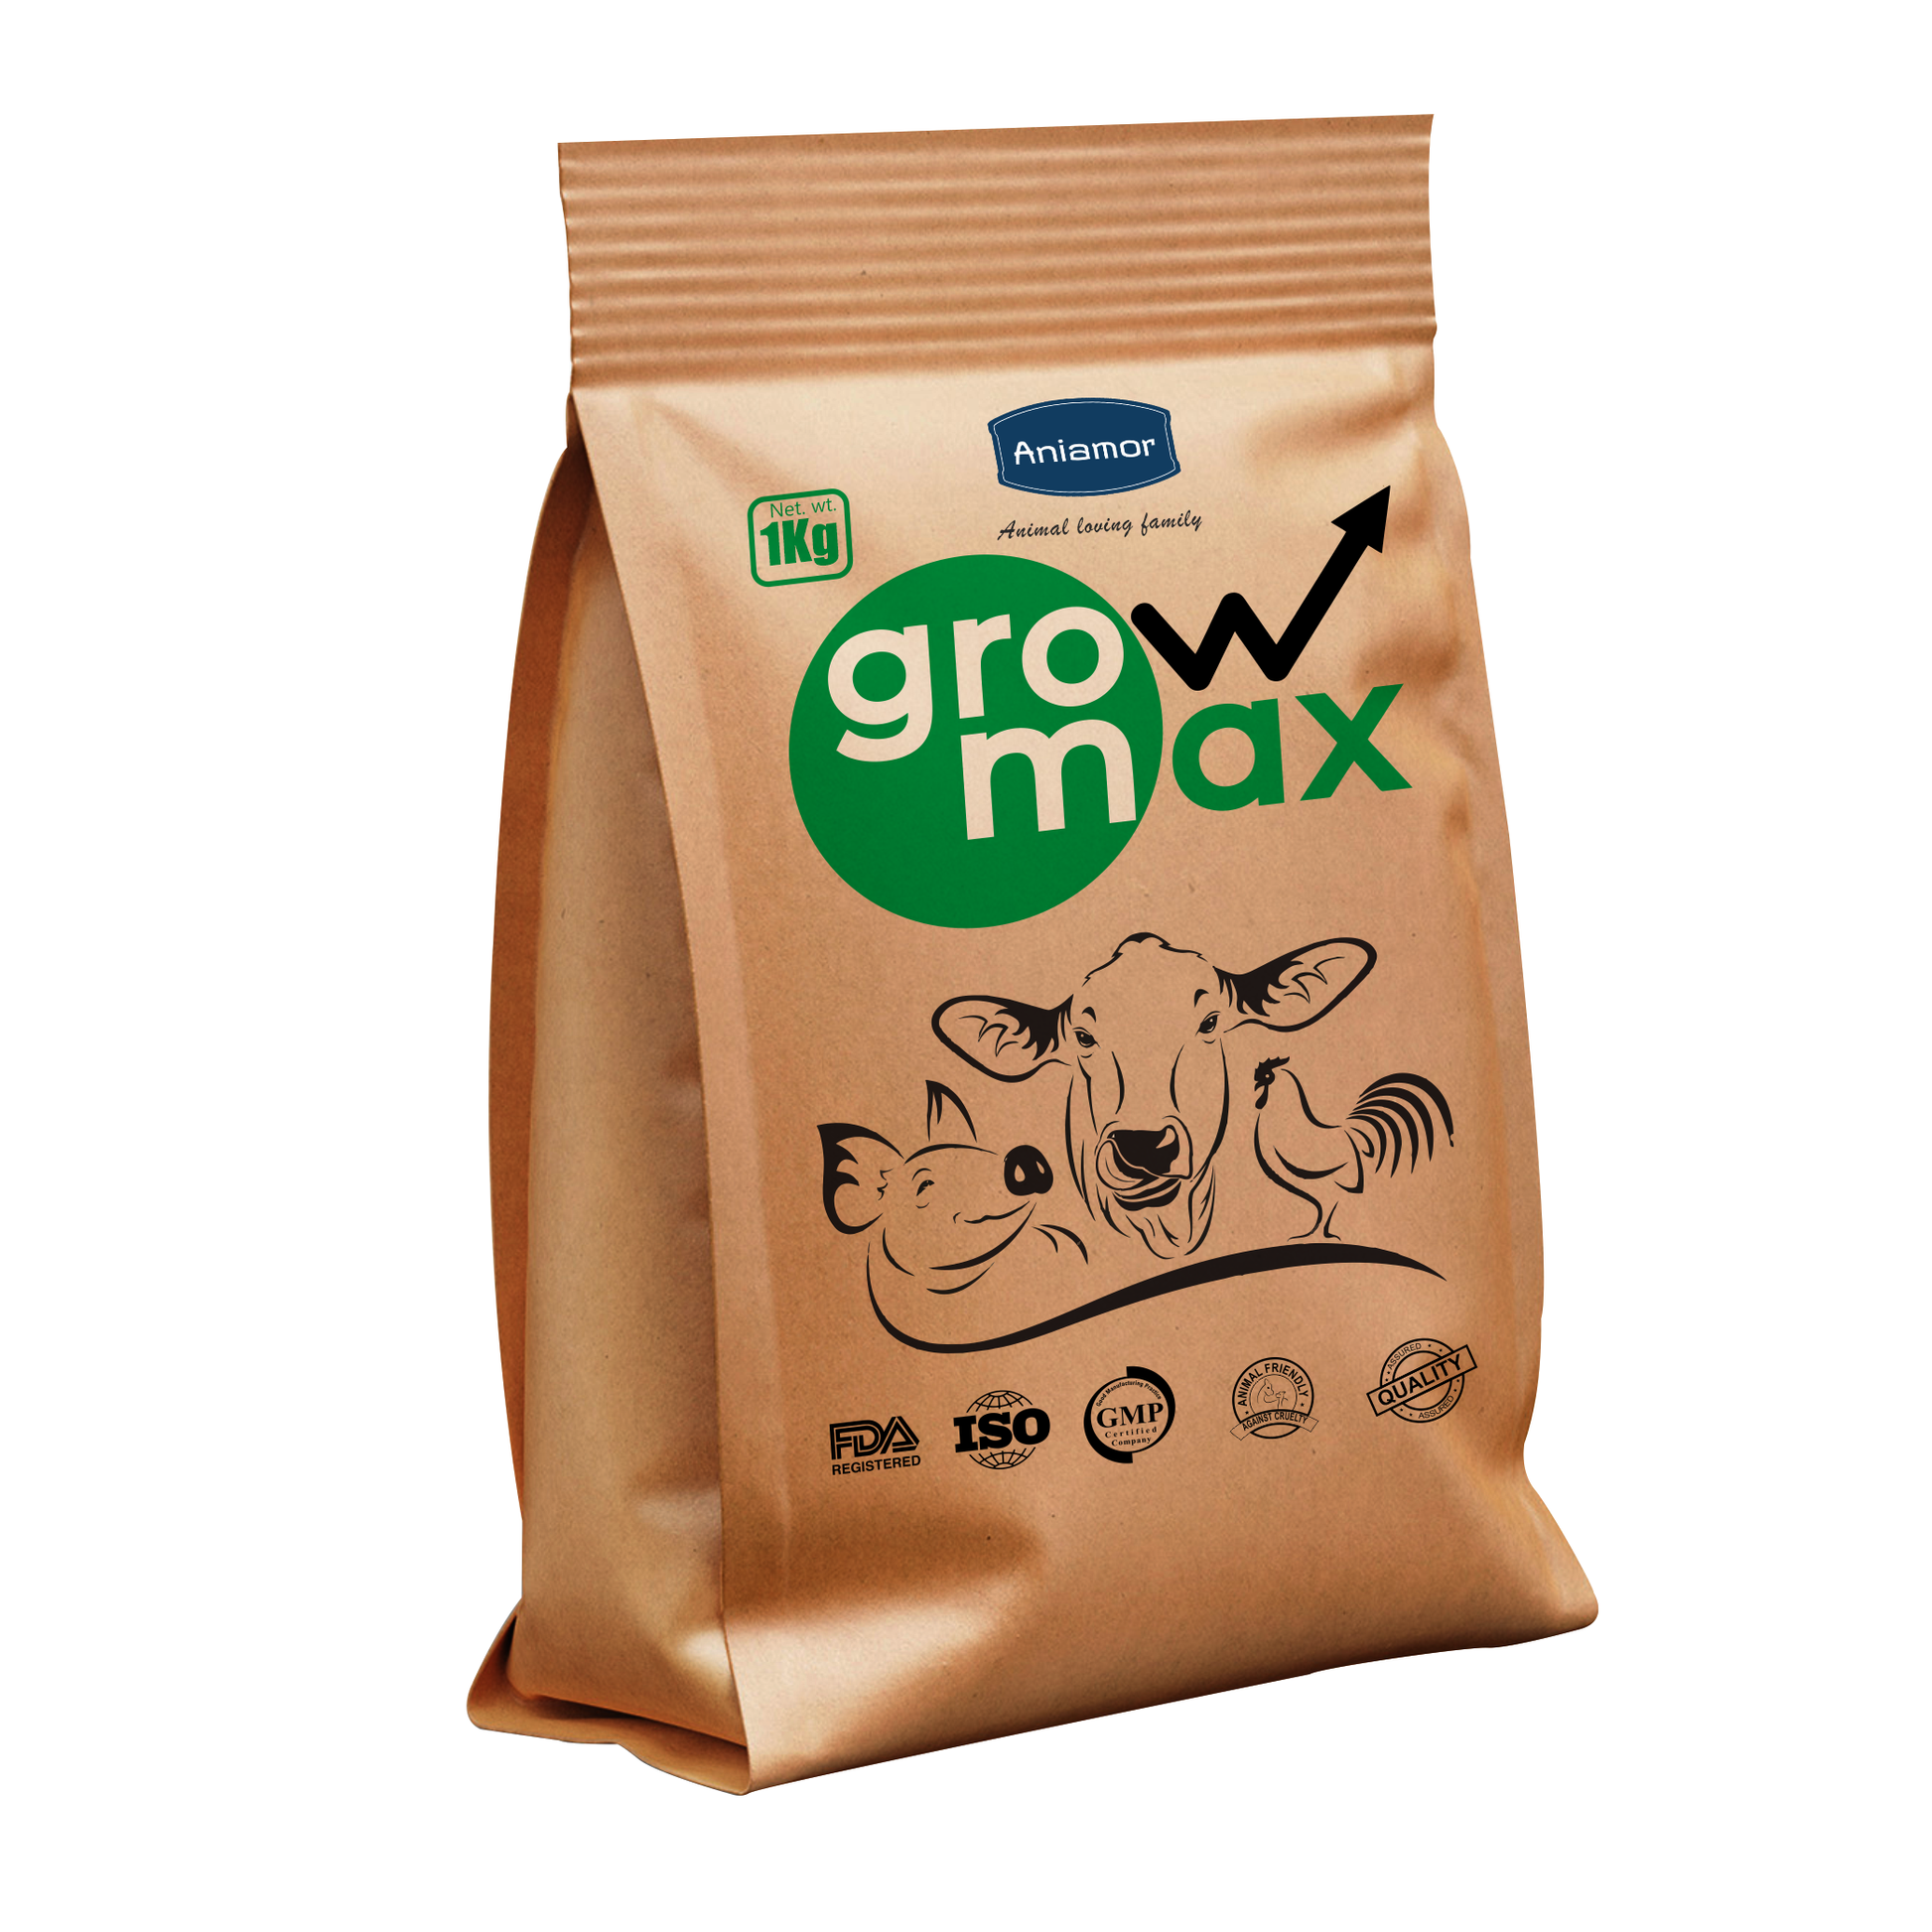 Aniamor-Growth booster Powder| Cattle Feed Supplement|1kg